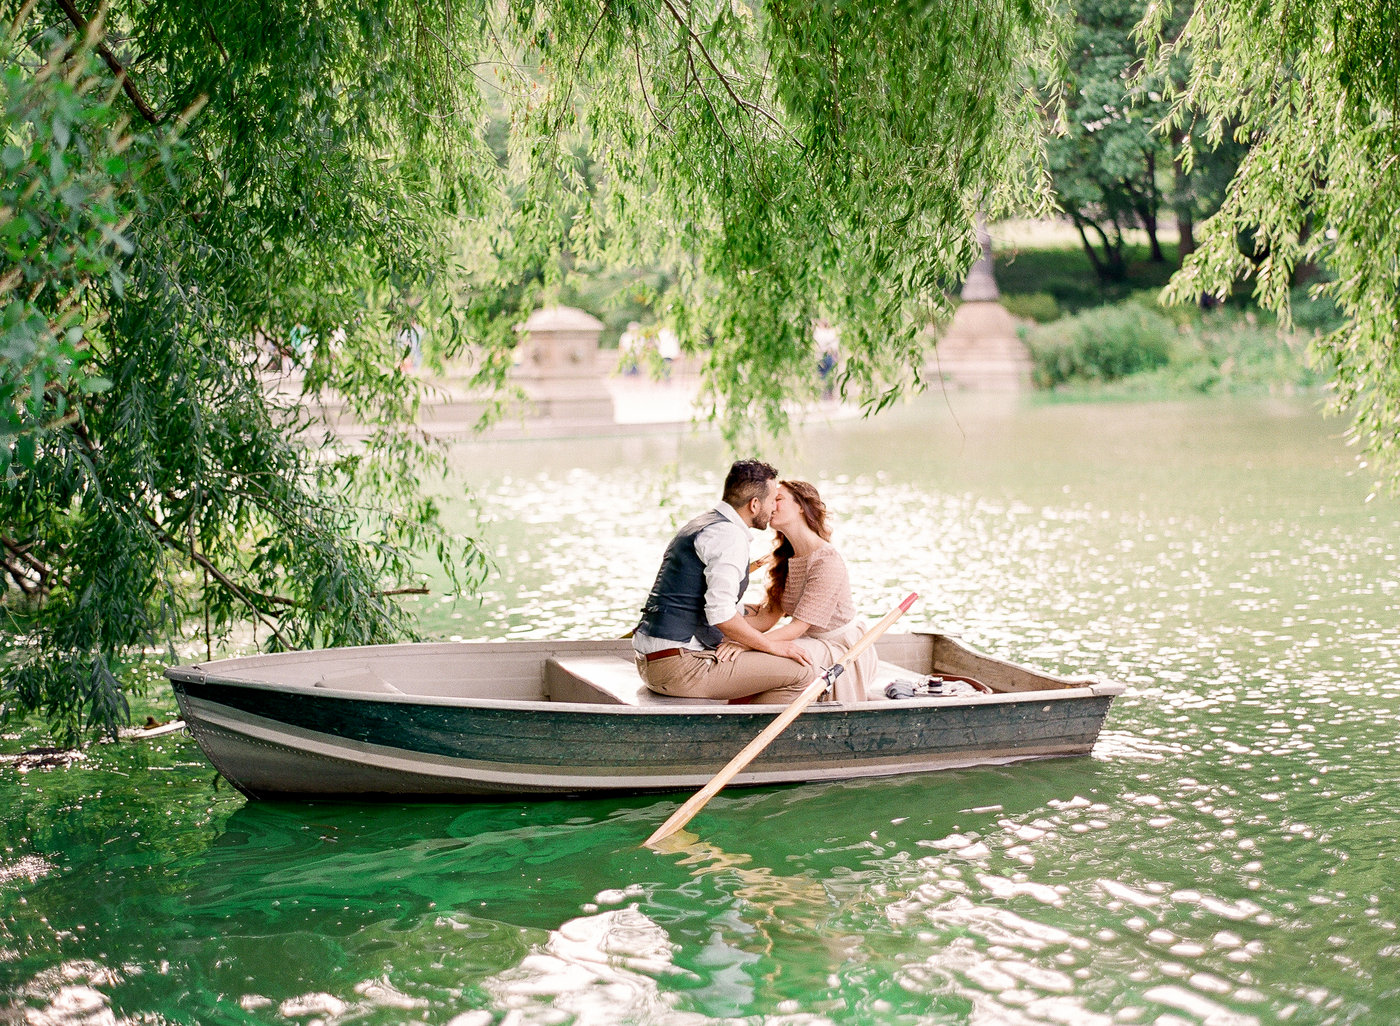 A couple kissing in a rowboat on the lake at Central Park under a weeping willow tree during an algae bloom that turned the water green photographed You Look Lovely Photography